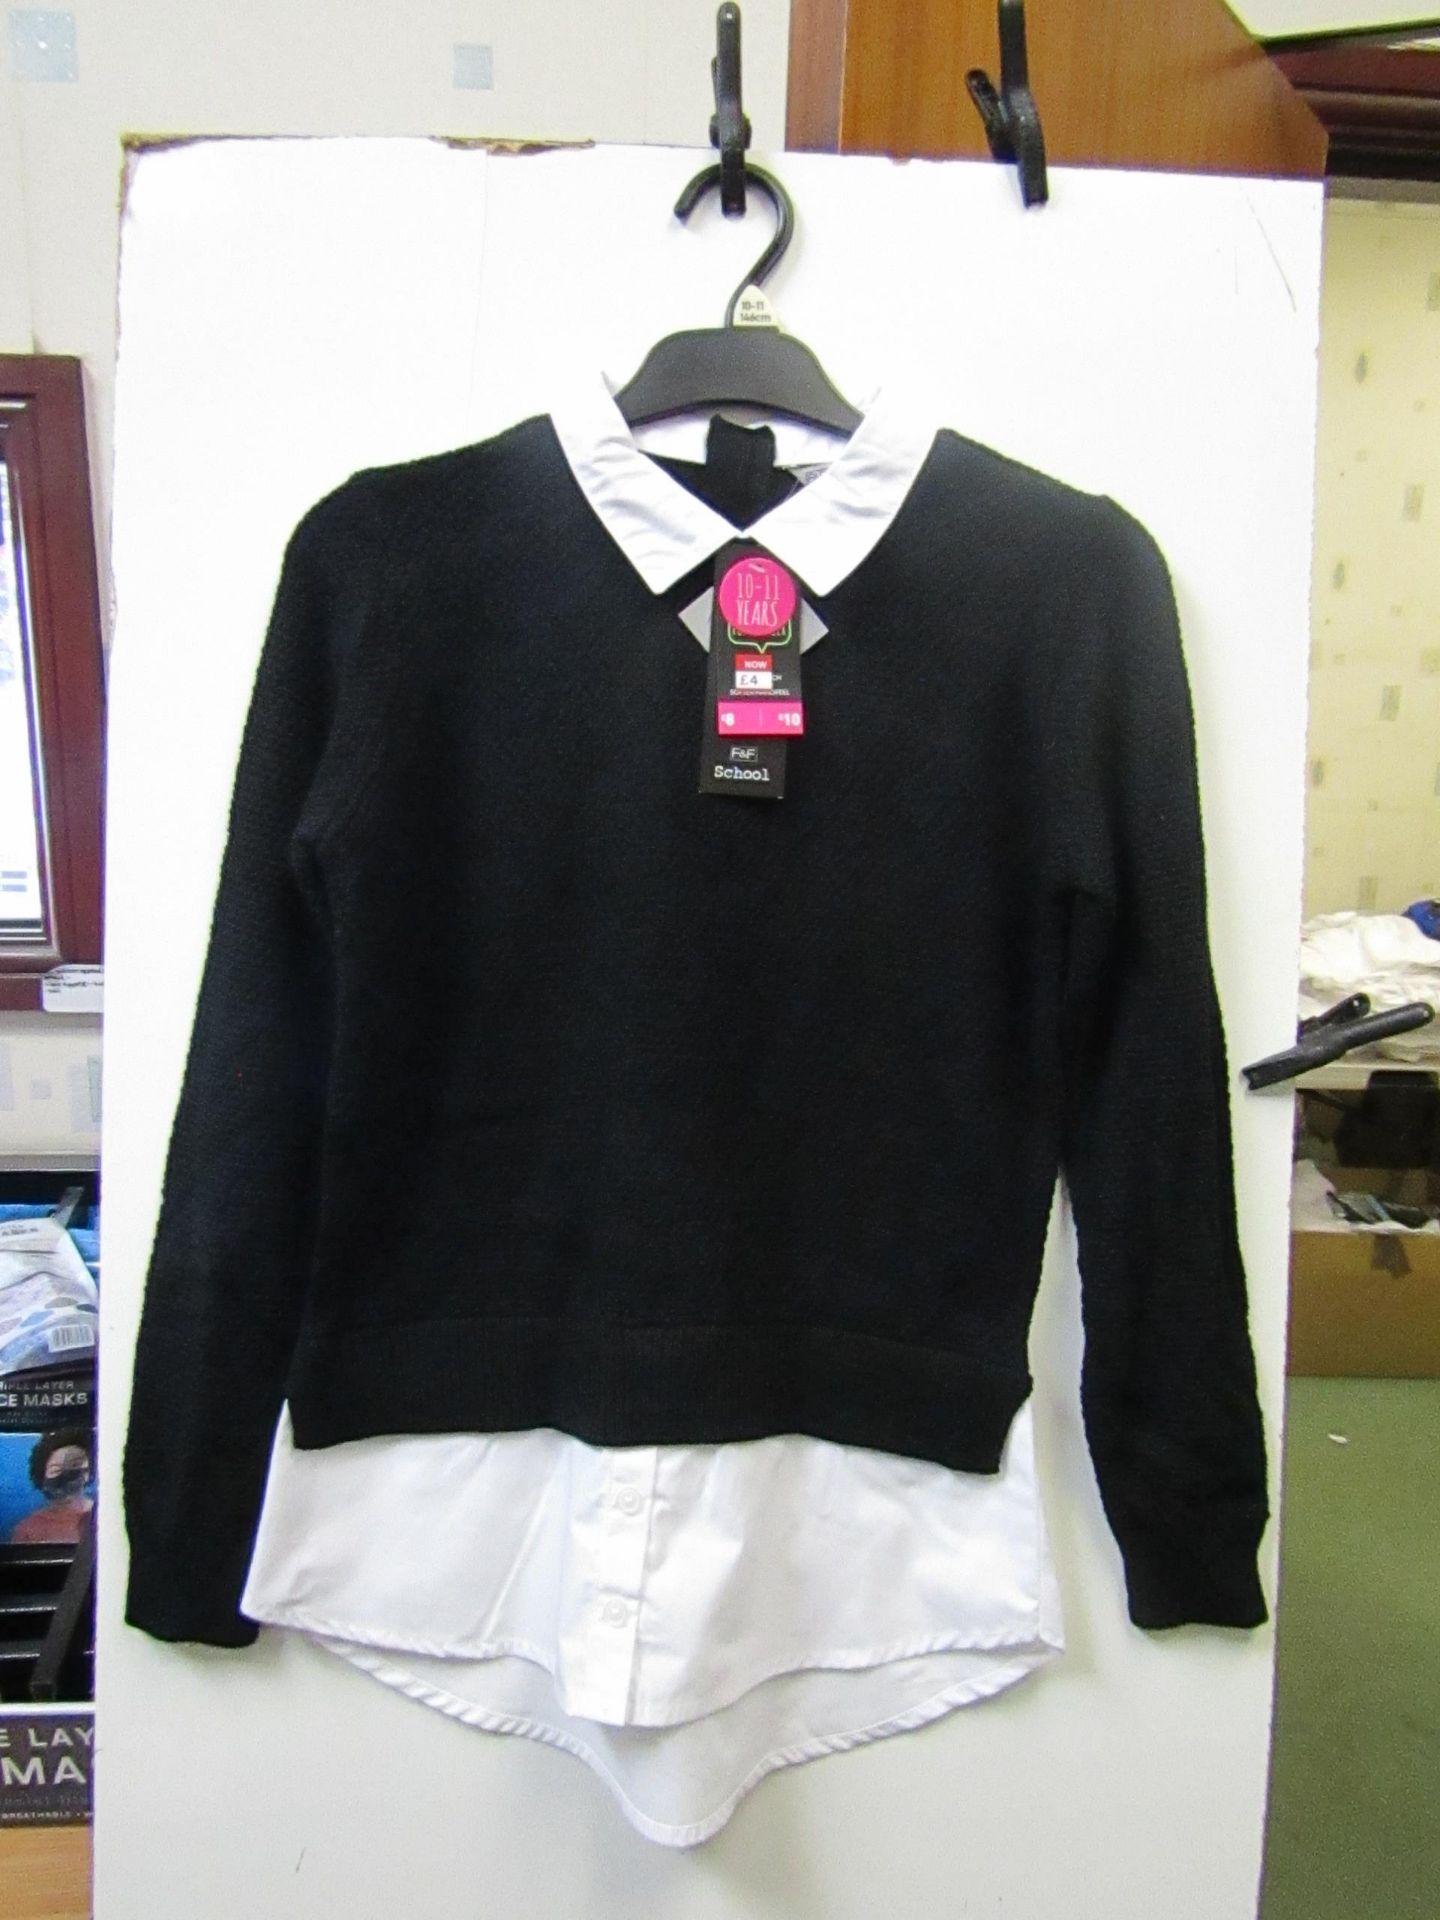 2x Girls school jumper black - size 10/11 - new but might have security tags on.